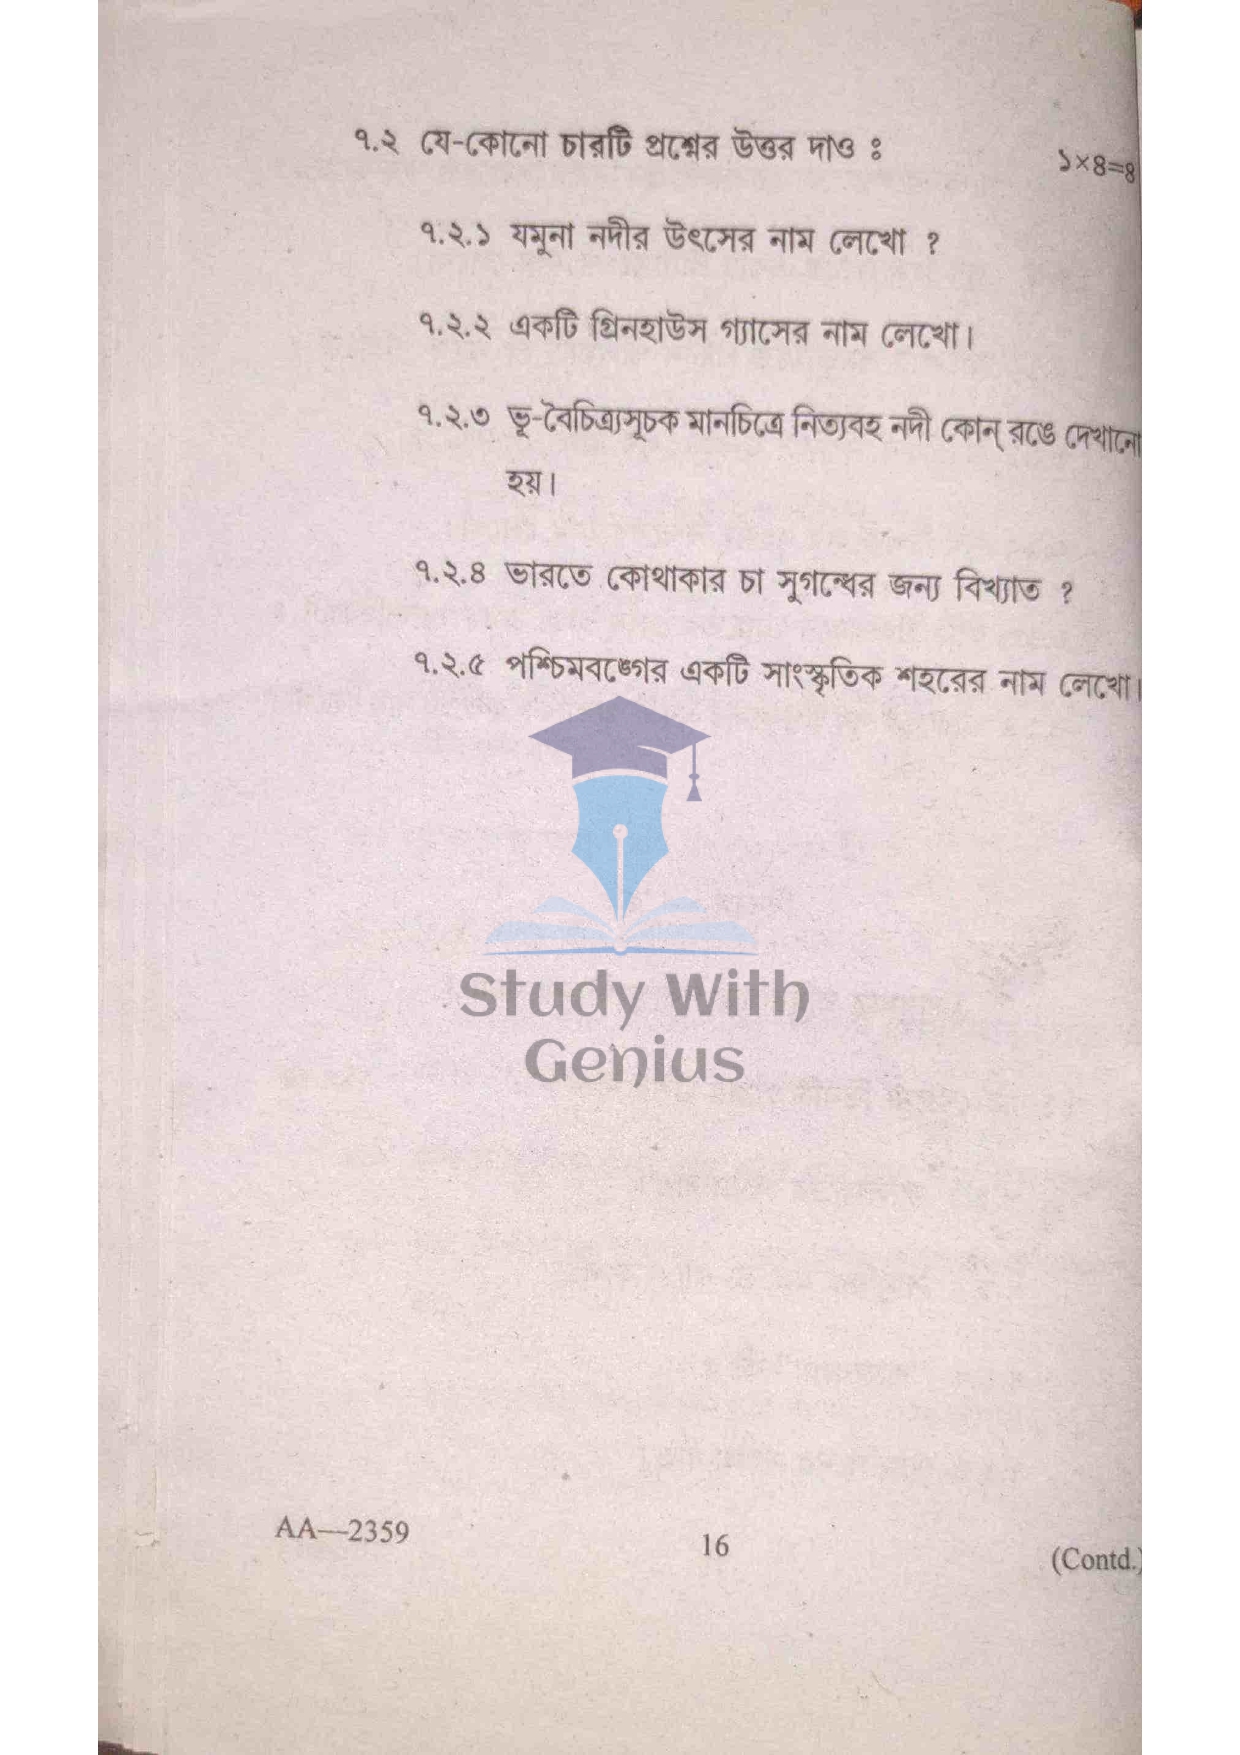 WBBSE Madhyamika Geography Subject Question Papers Bengali Medium 2020